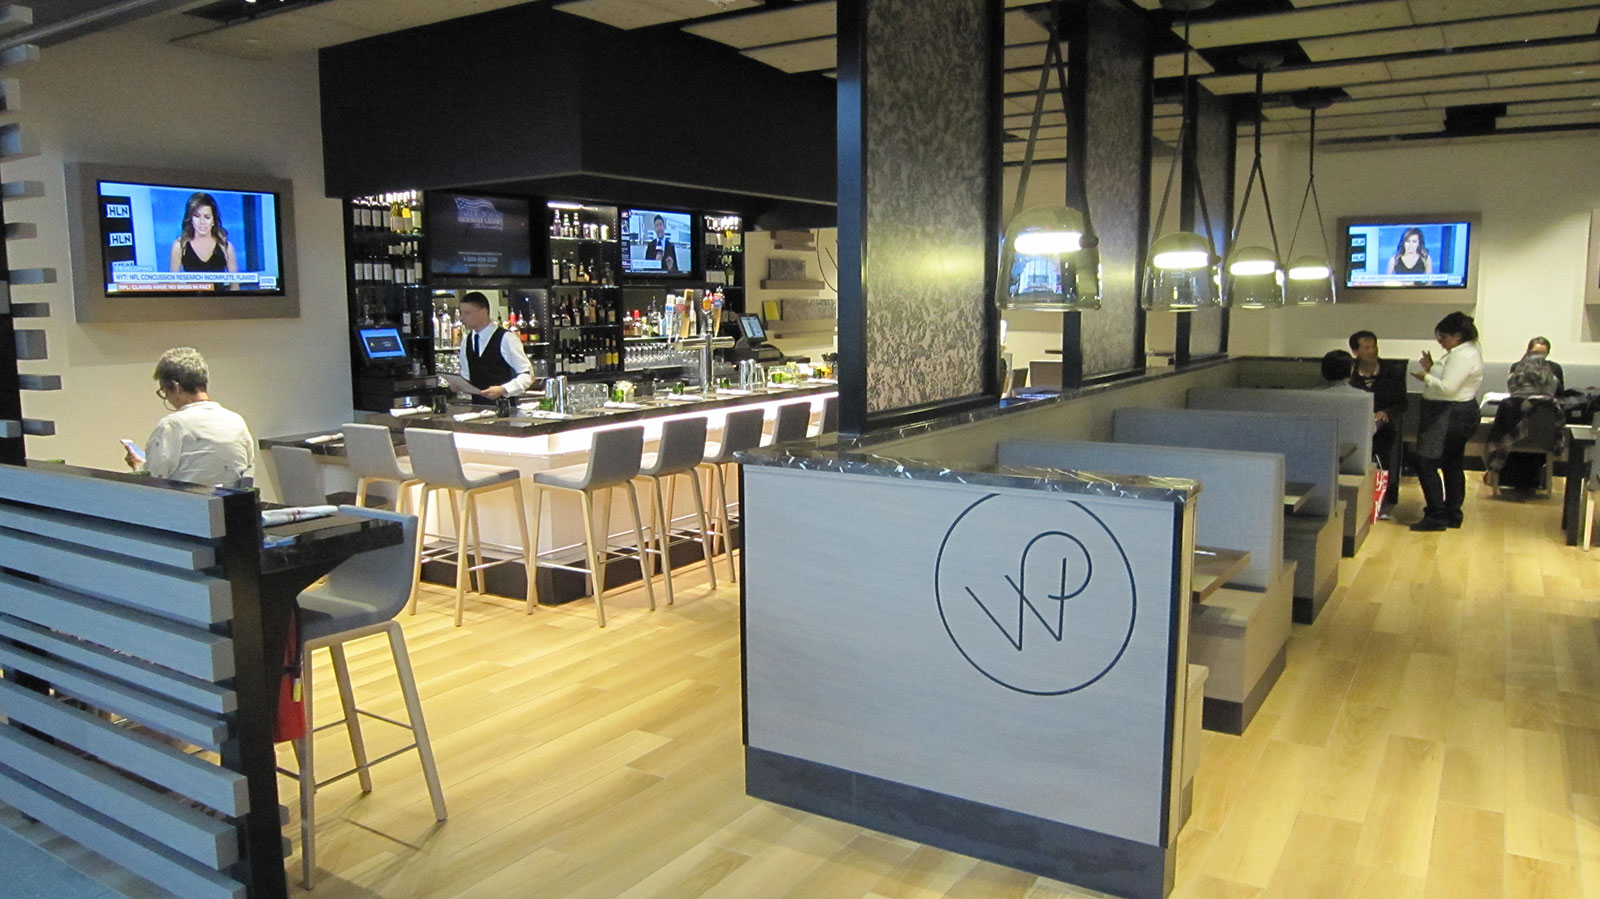 The Kitchen by Wolfgang Puck, Dulles International Airport